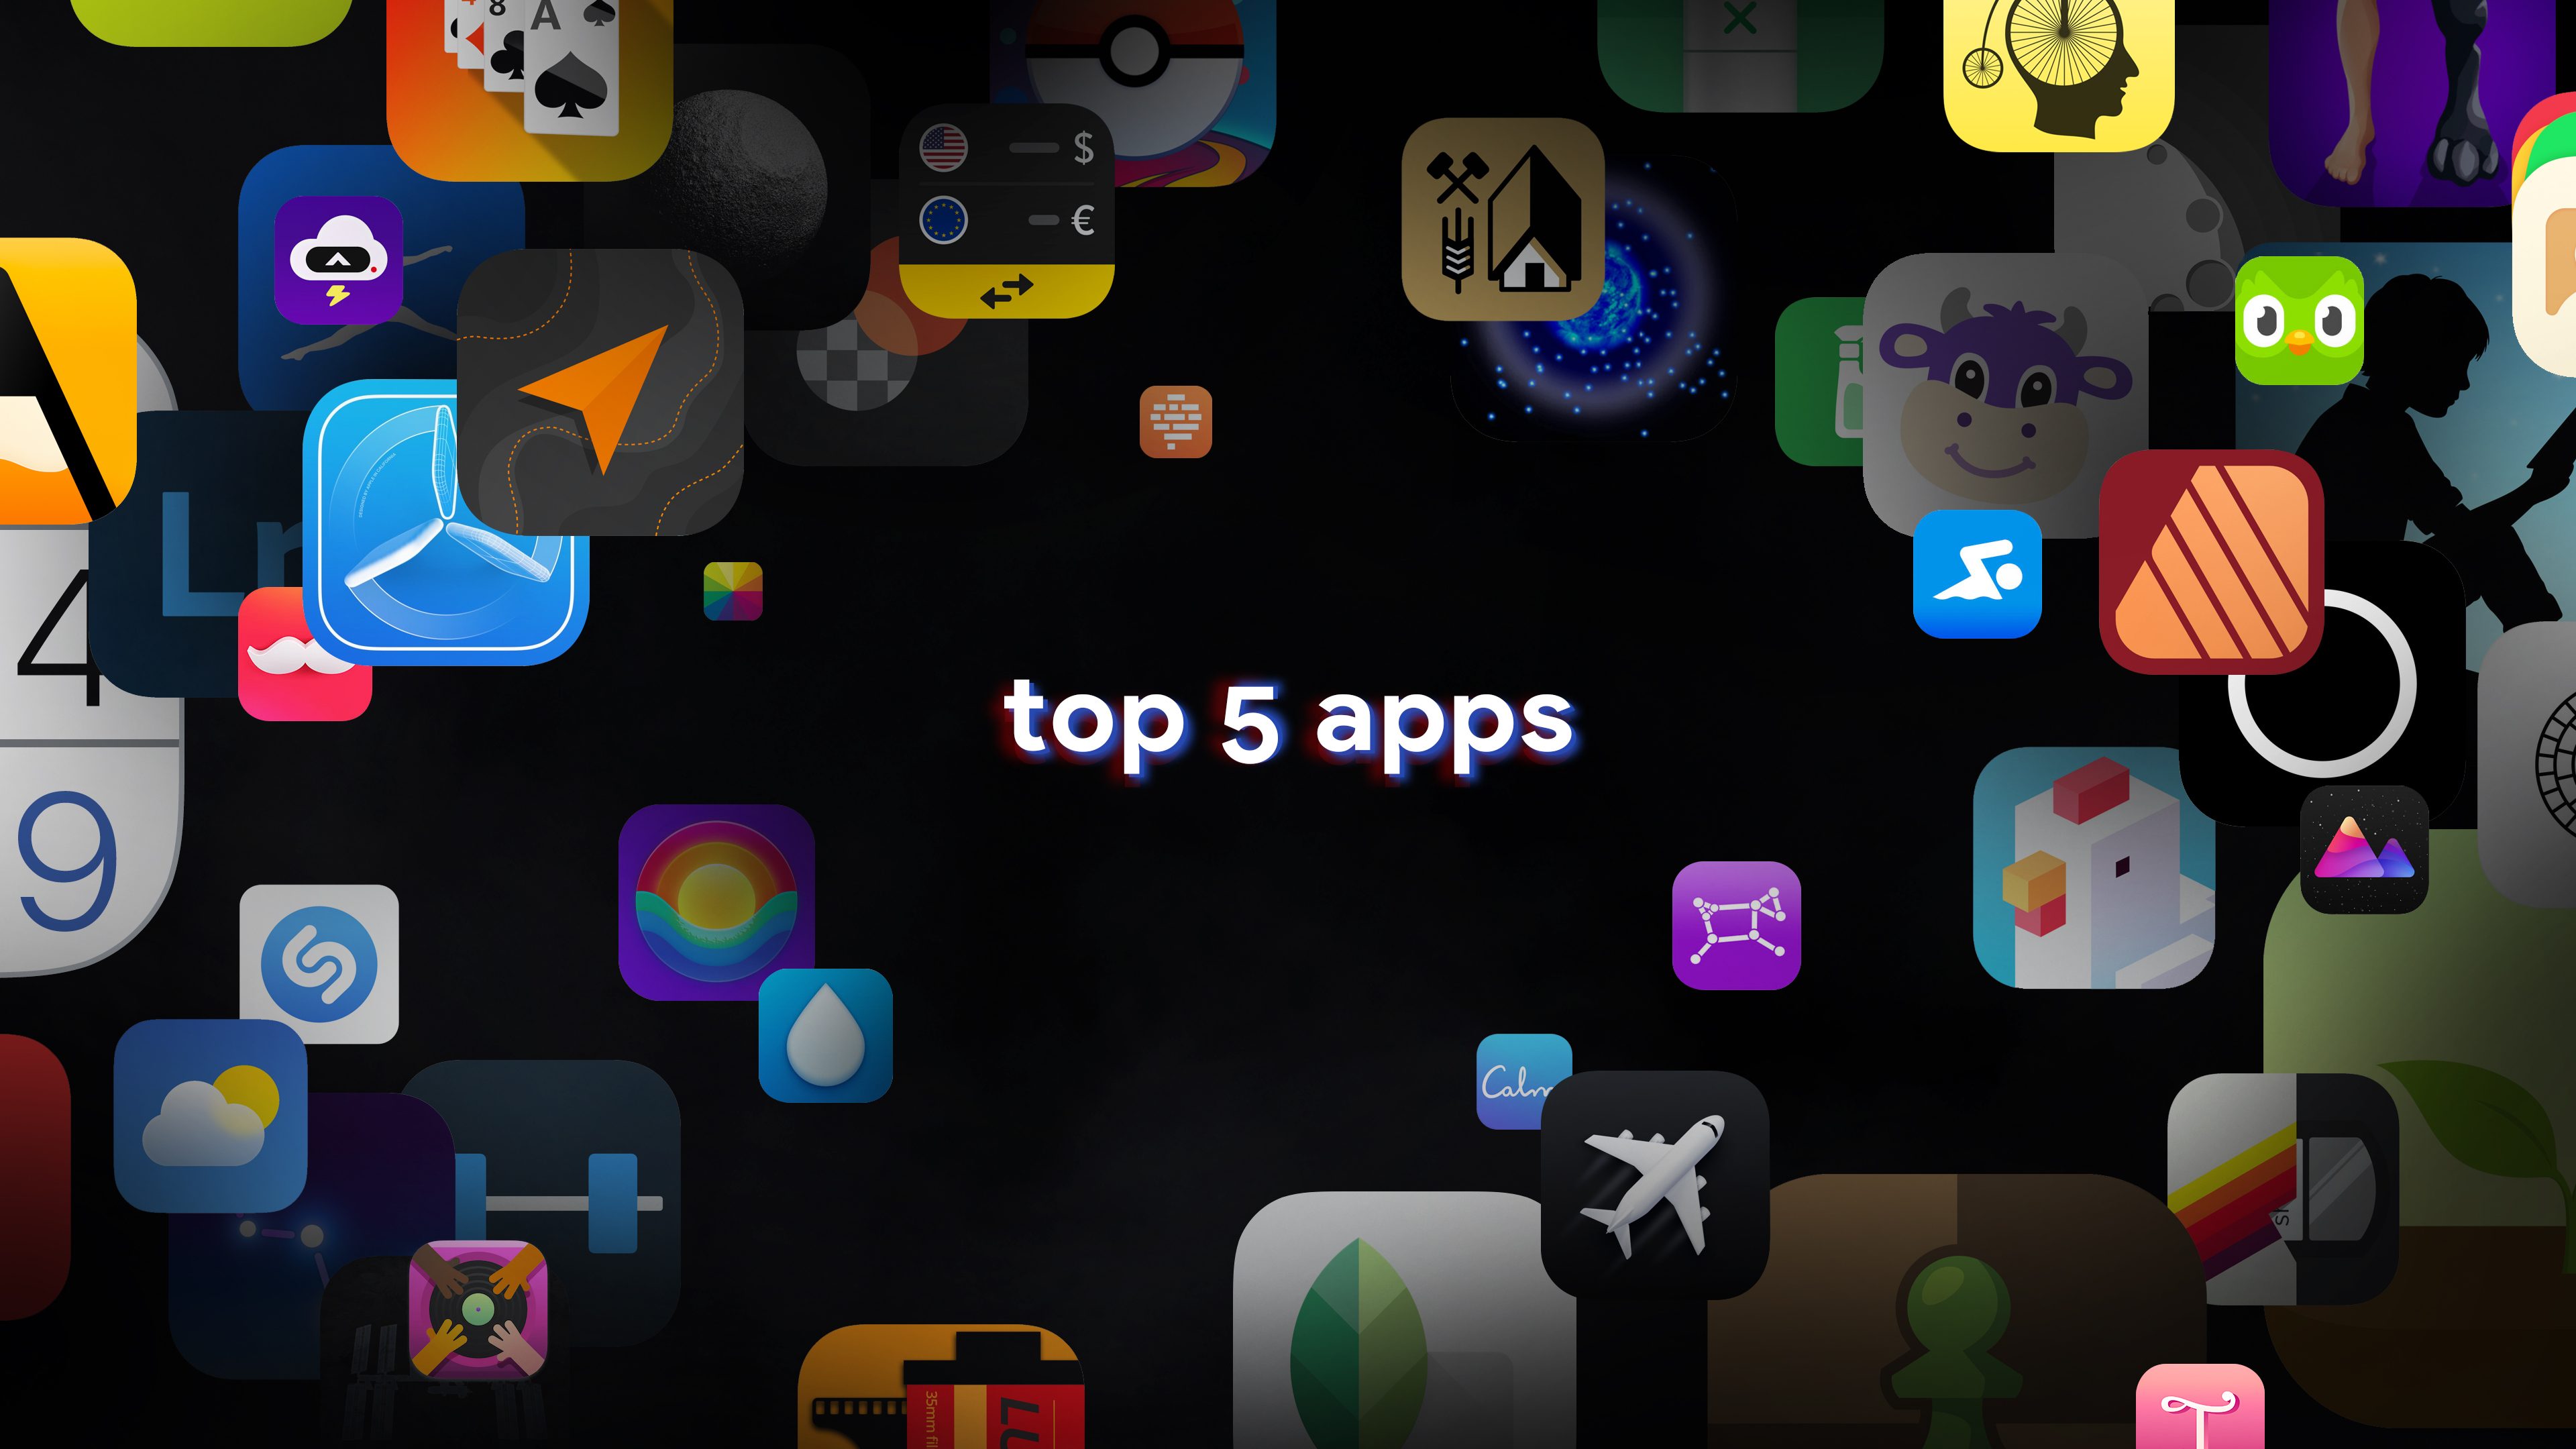 Here are the top 5 apps of the week you can check out